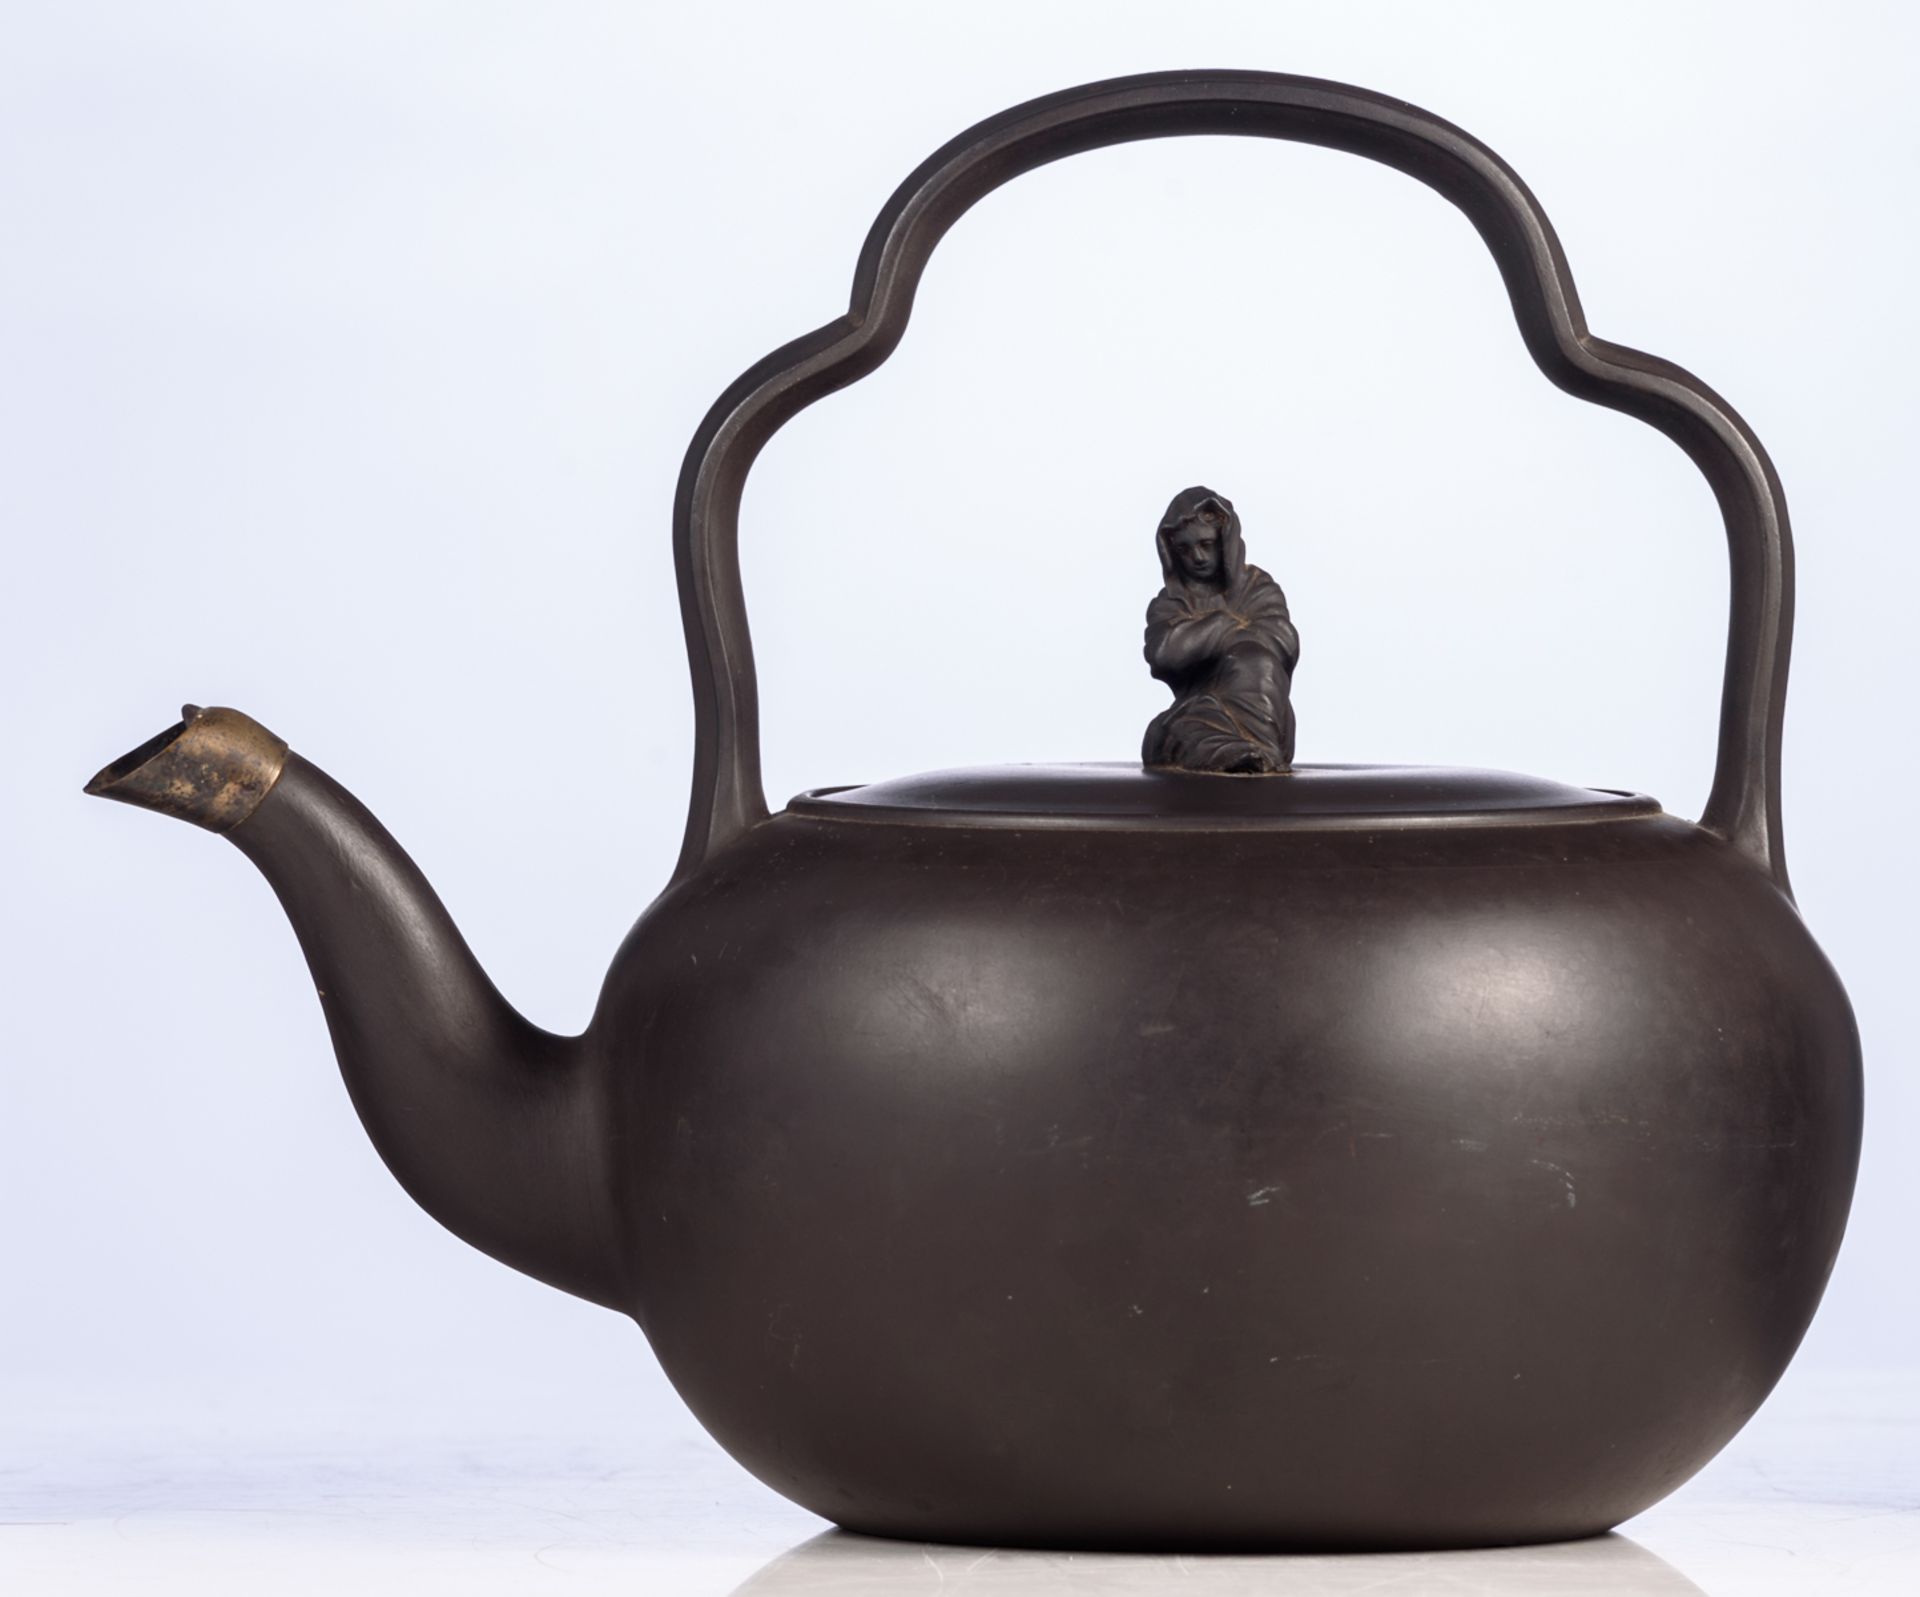 An English black basalt teakettle with a lobed bail handle, a Sybil knop and a silver cap on the - Image 2 of 8